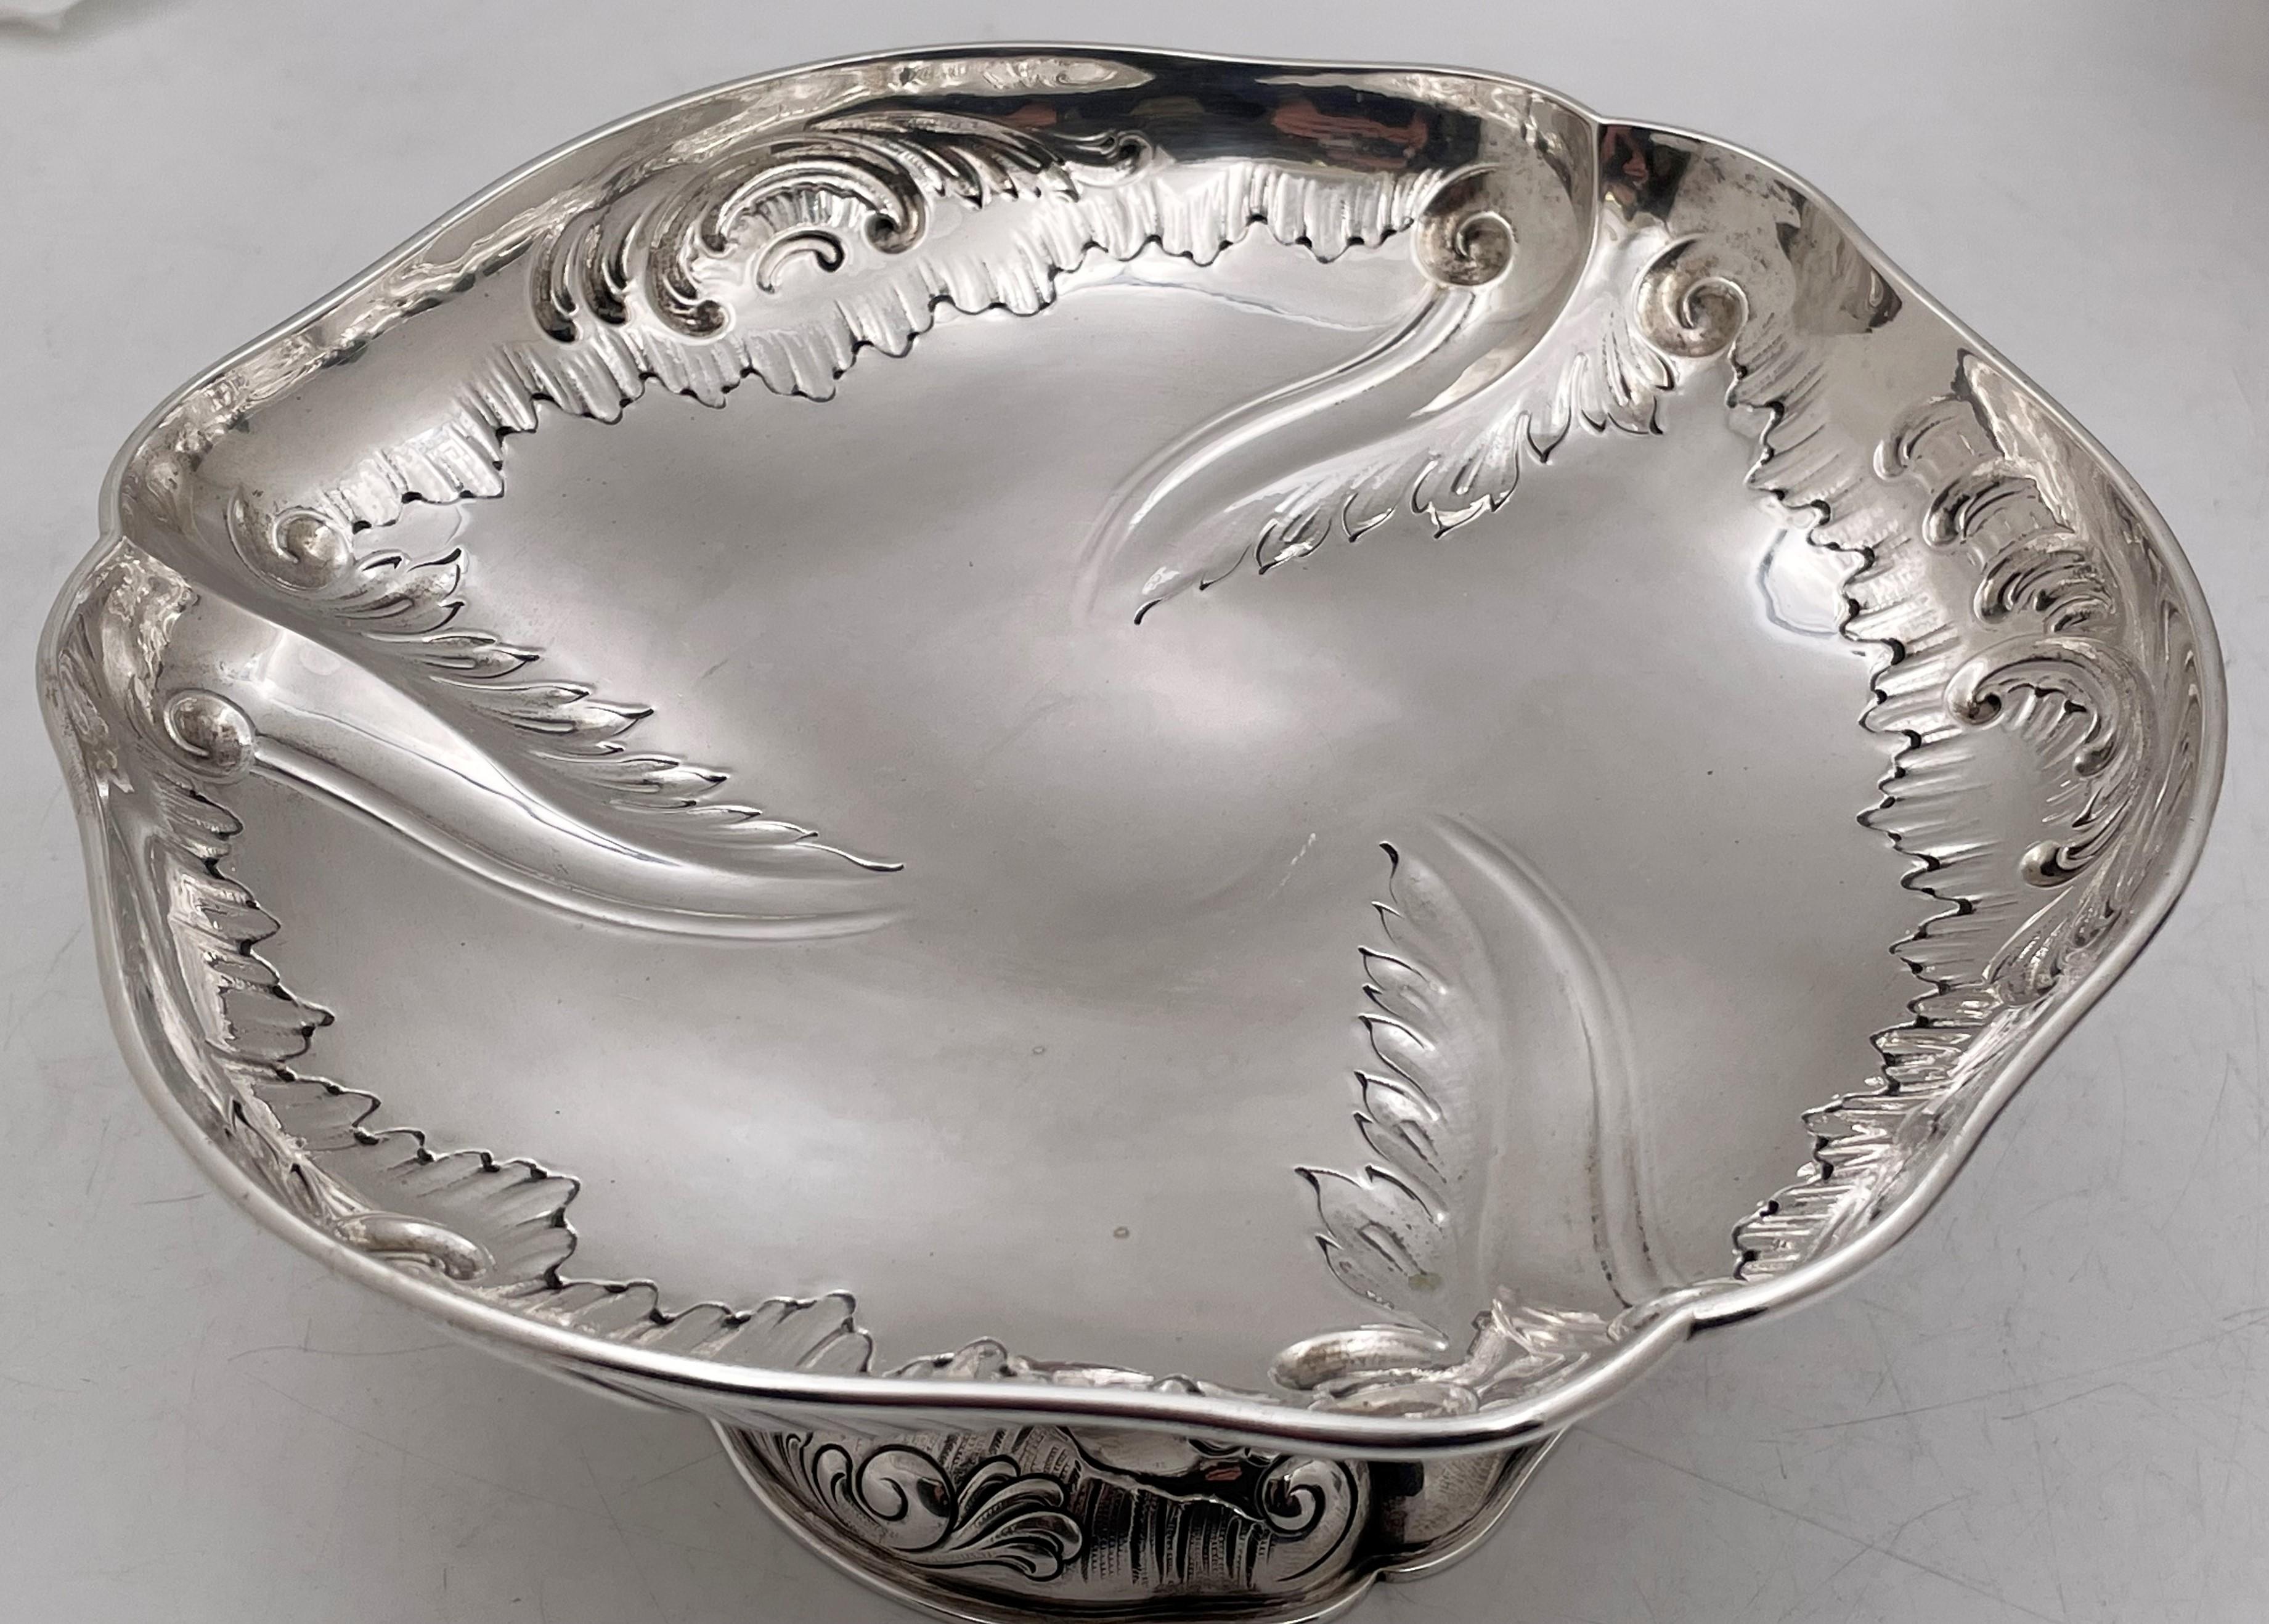 German Pair of Friedlander Royal Maker Continental Silver 19th Century Tazza / Bowls For Sale